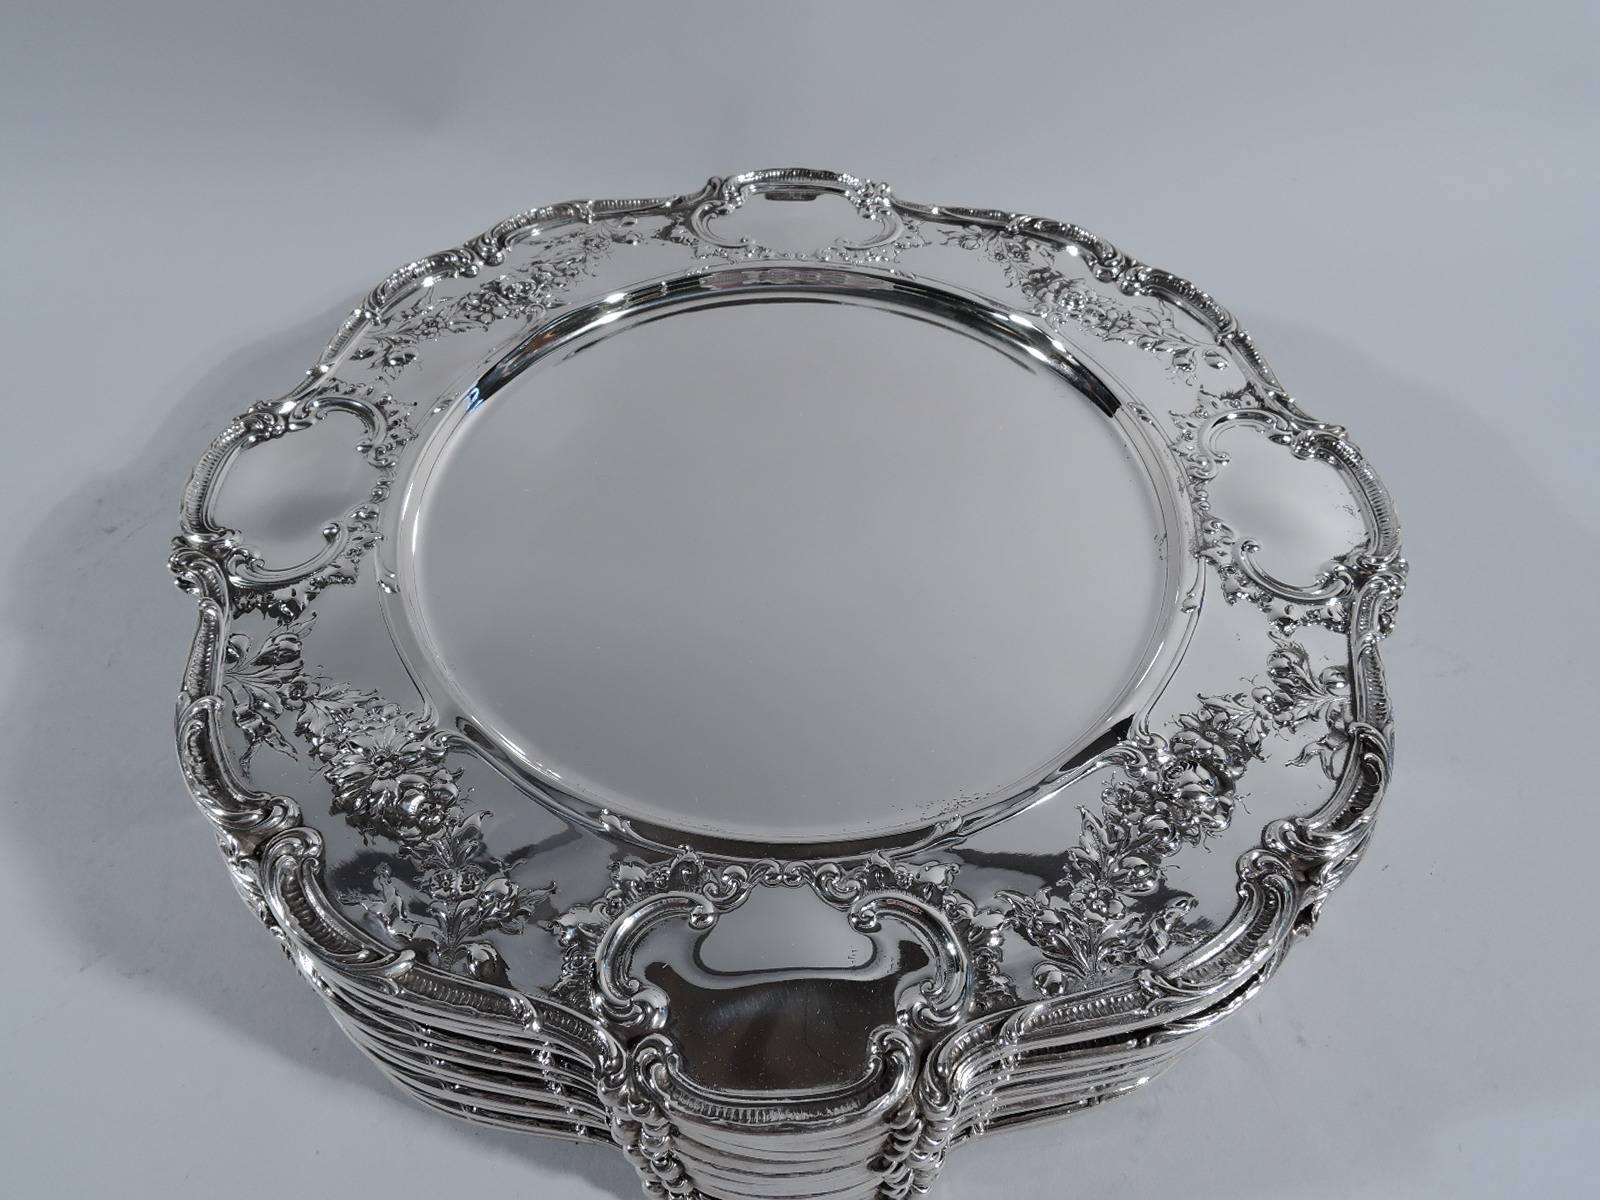 Set of 12 Edwardian sterling silver dinner plates. Made by Gorham in Providence in 1914. Each: plain well. On shoulder 4 scrolled cartouches (vacant) joined by floral garlands. Scrolled rim. Hallmark includes no. A6620 and date symbol. Total weight: